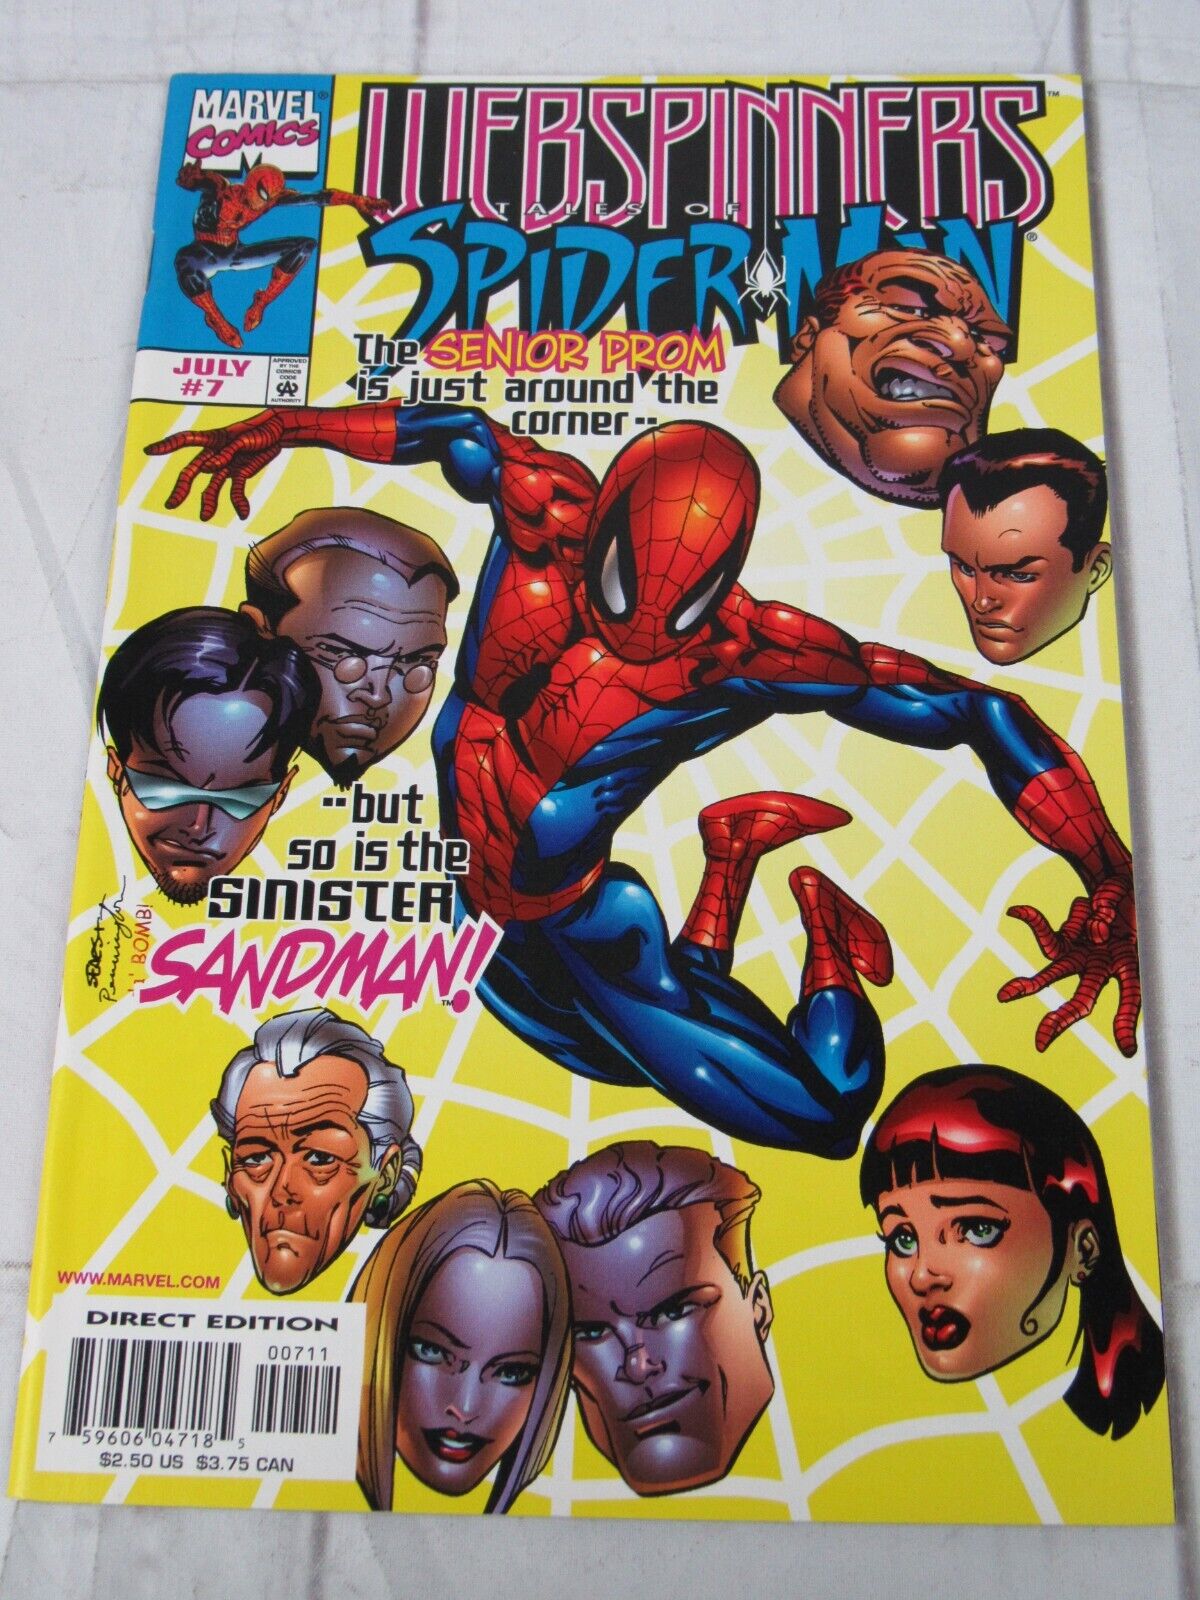 Webspinners: Tales of Spider-Man #7 July 1999 Marvel Comics